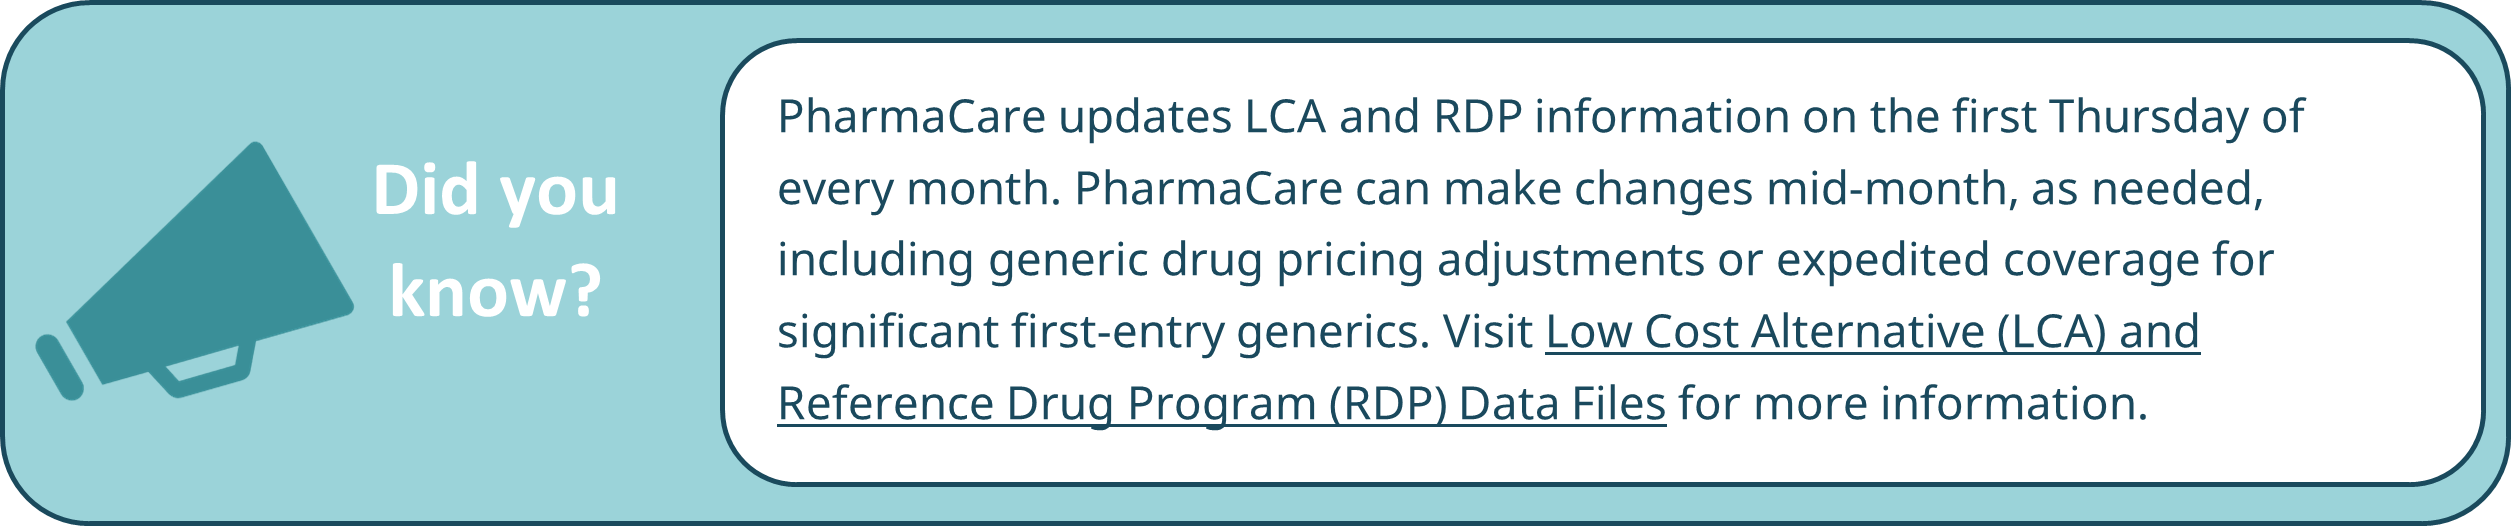 PharmaCare updates LCA and RDP information on the first Thursday of every month. PharmaCare can make changes mid-month, as needed, including generic drug pricing adjustments or expedited coverage for significant first-entry generics. Visit Low Cost Alternative (LCA) and Reference Drug Program (RDP) Data Files for more information. 